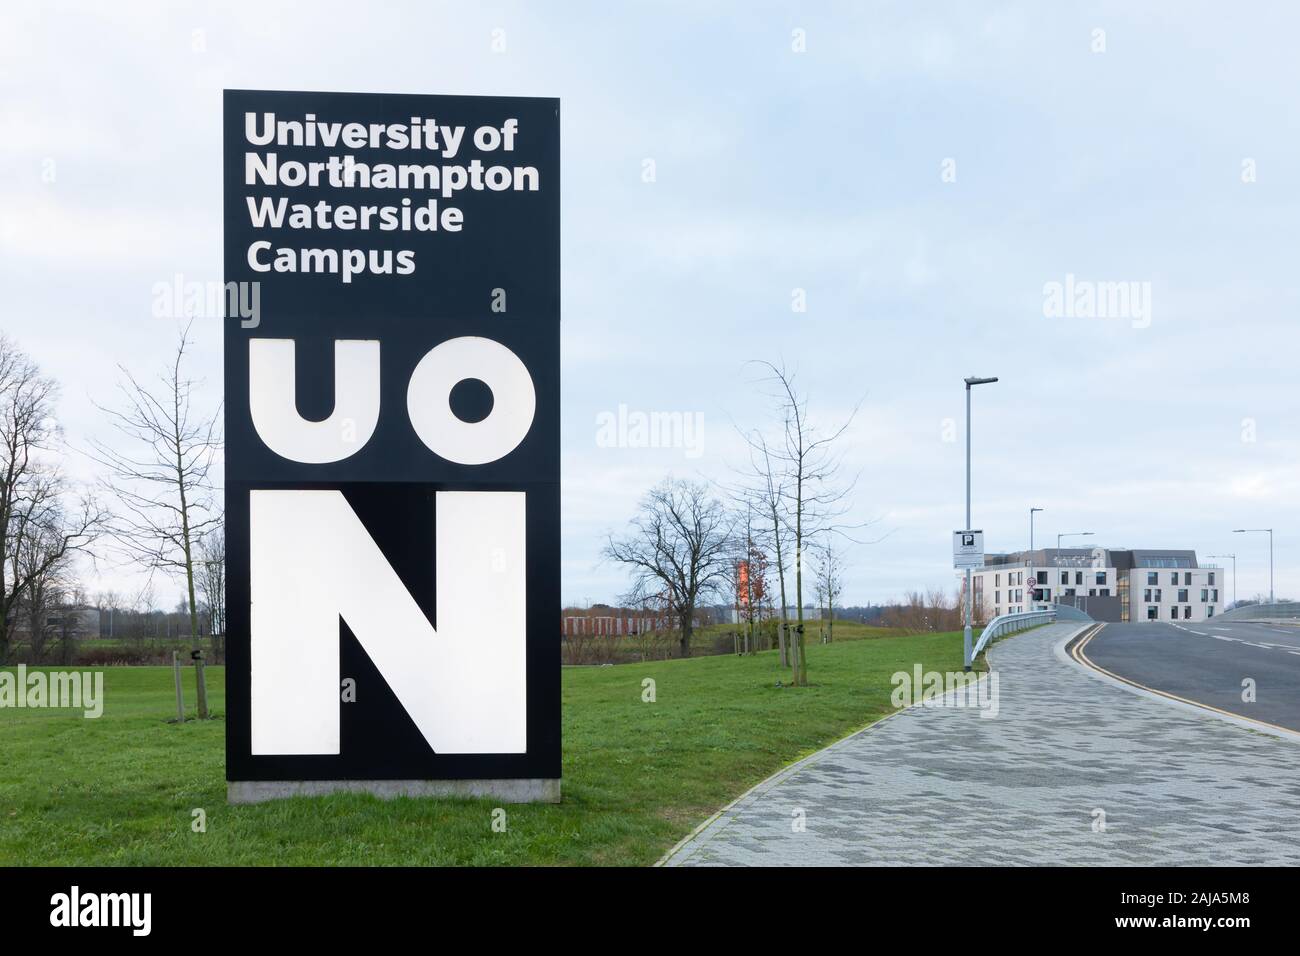 Northampton, Northamptonshire, UK: Sign for the University of Northampton Waterside Campus next to a road leading to a building on the site. Stock Photo